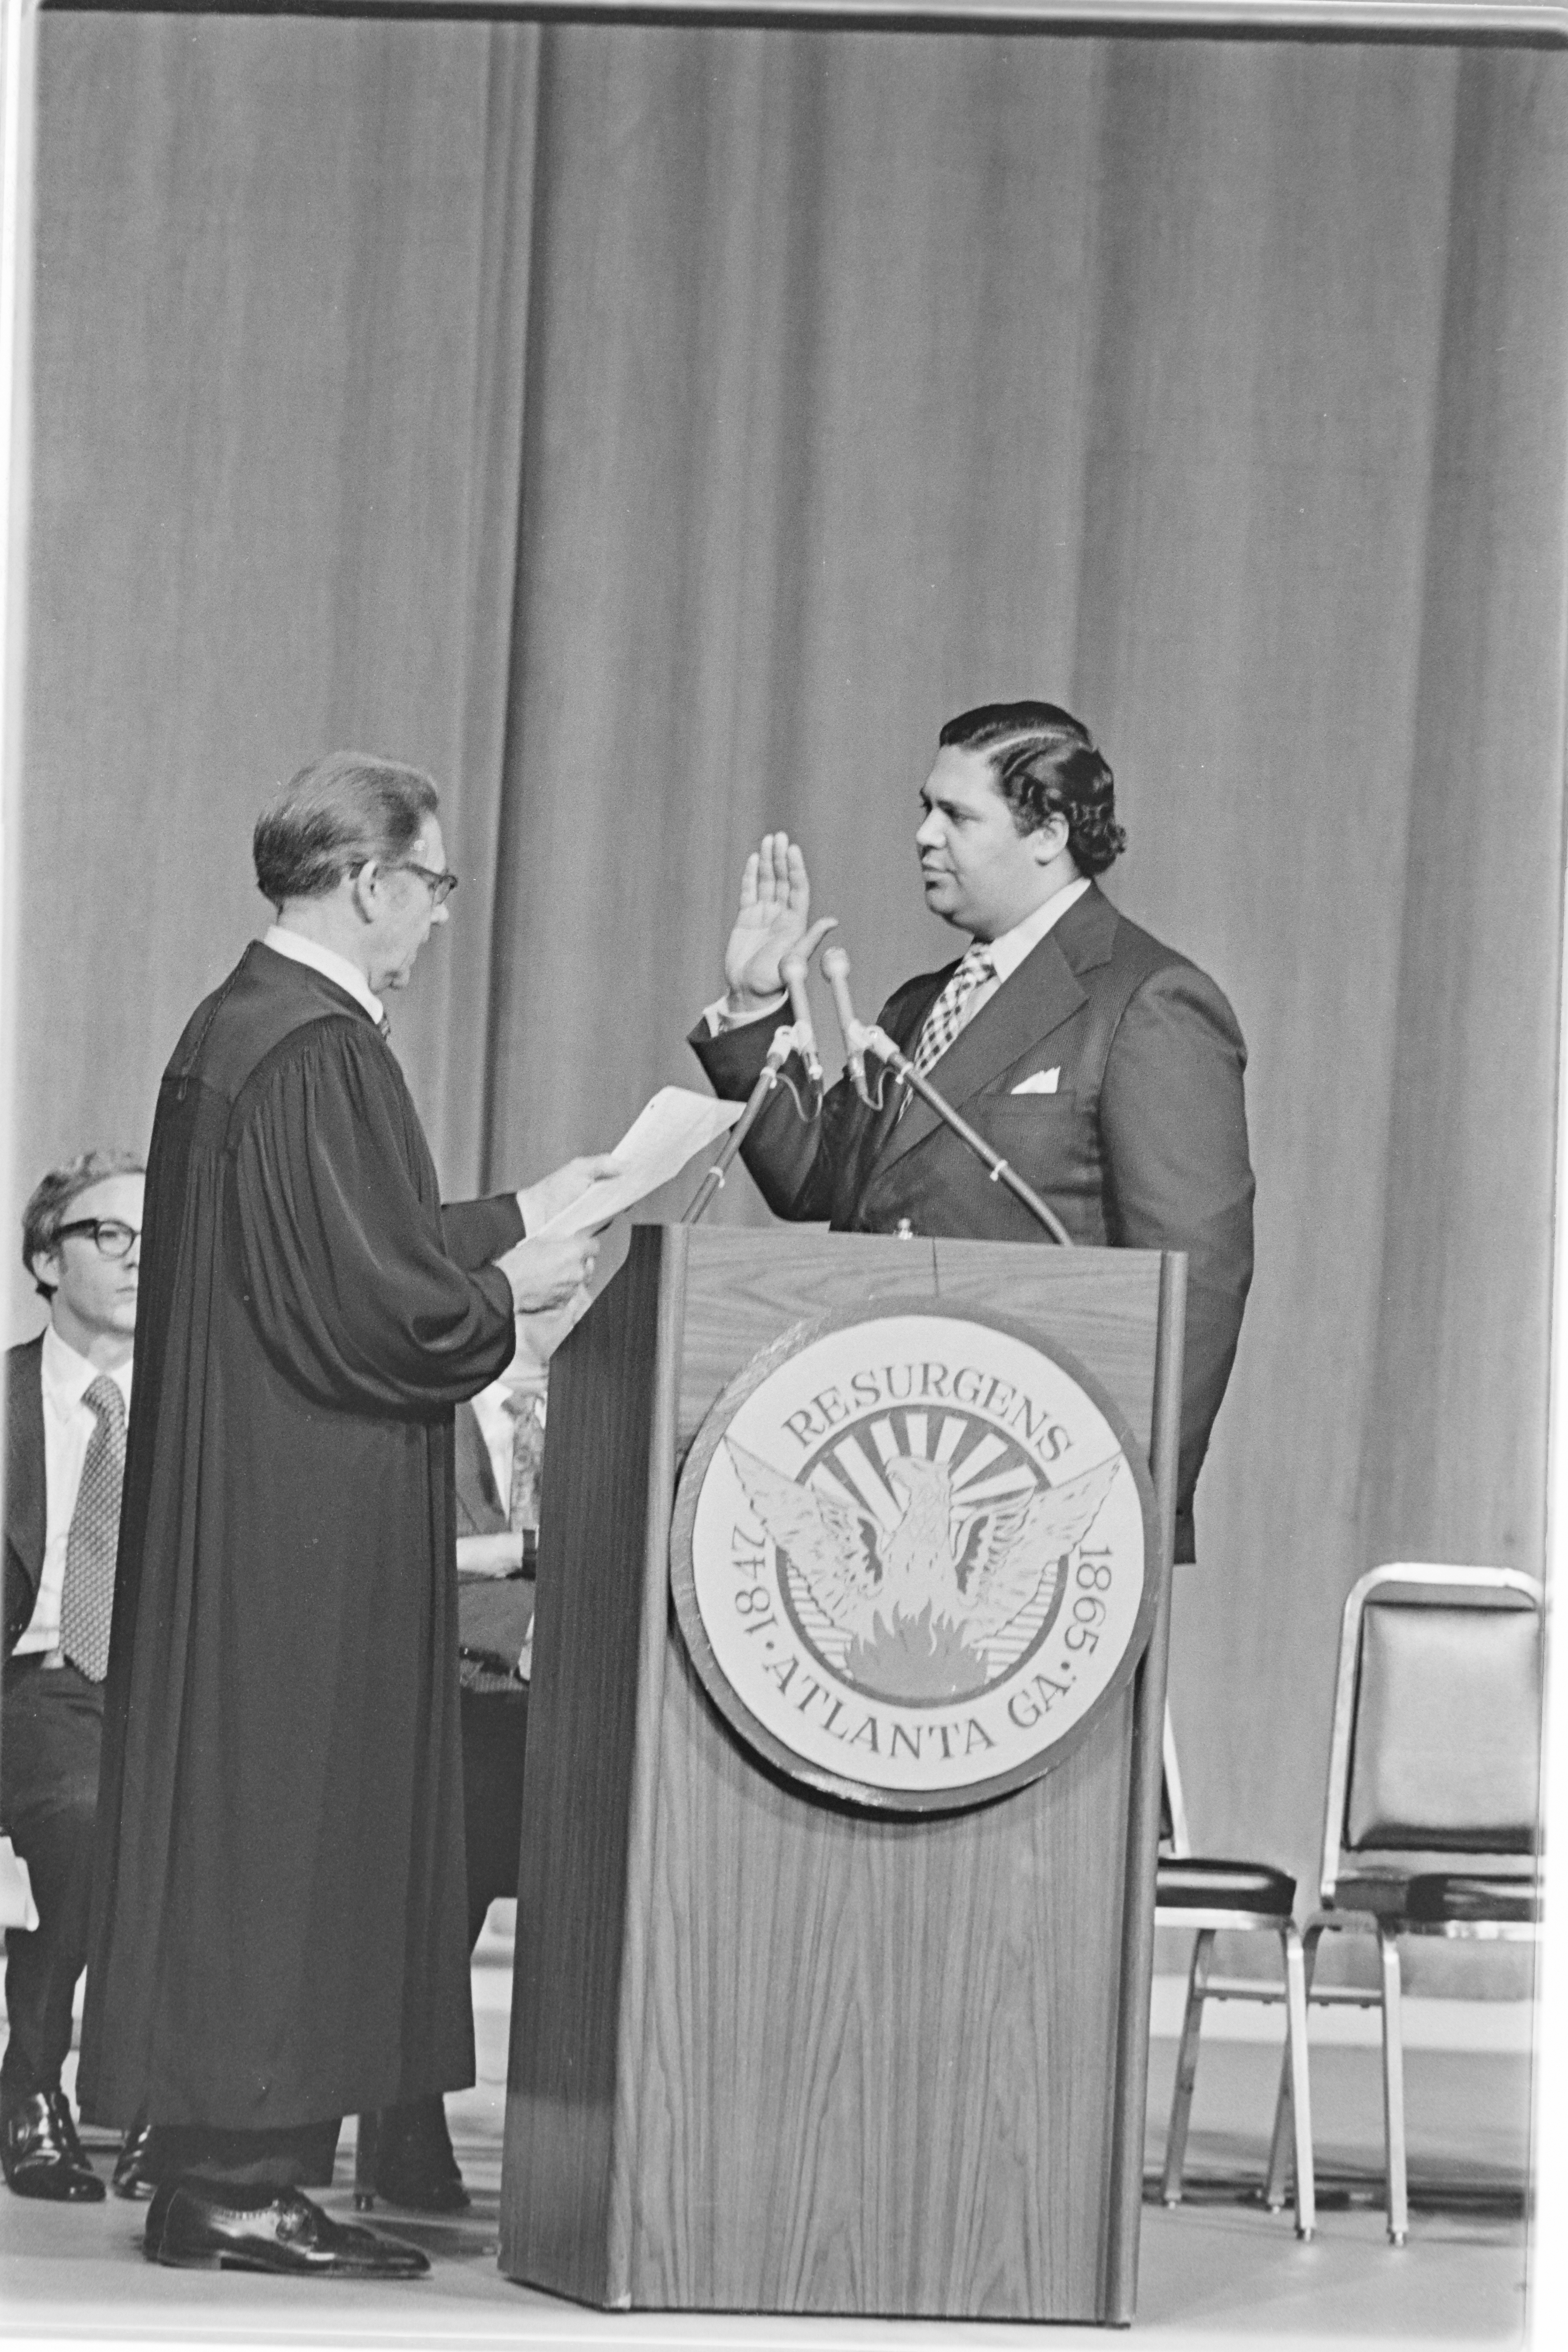 Maynard Jackson, a Black politician, being sworn in as mayor of Atlanta. He stands at a podium, serious and ready.